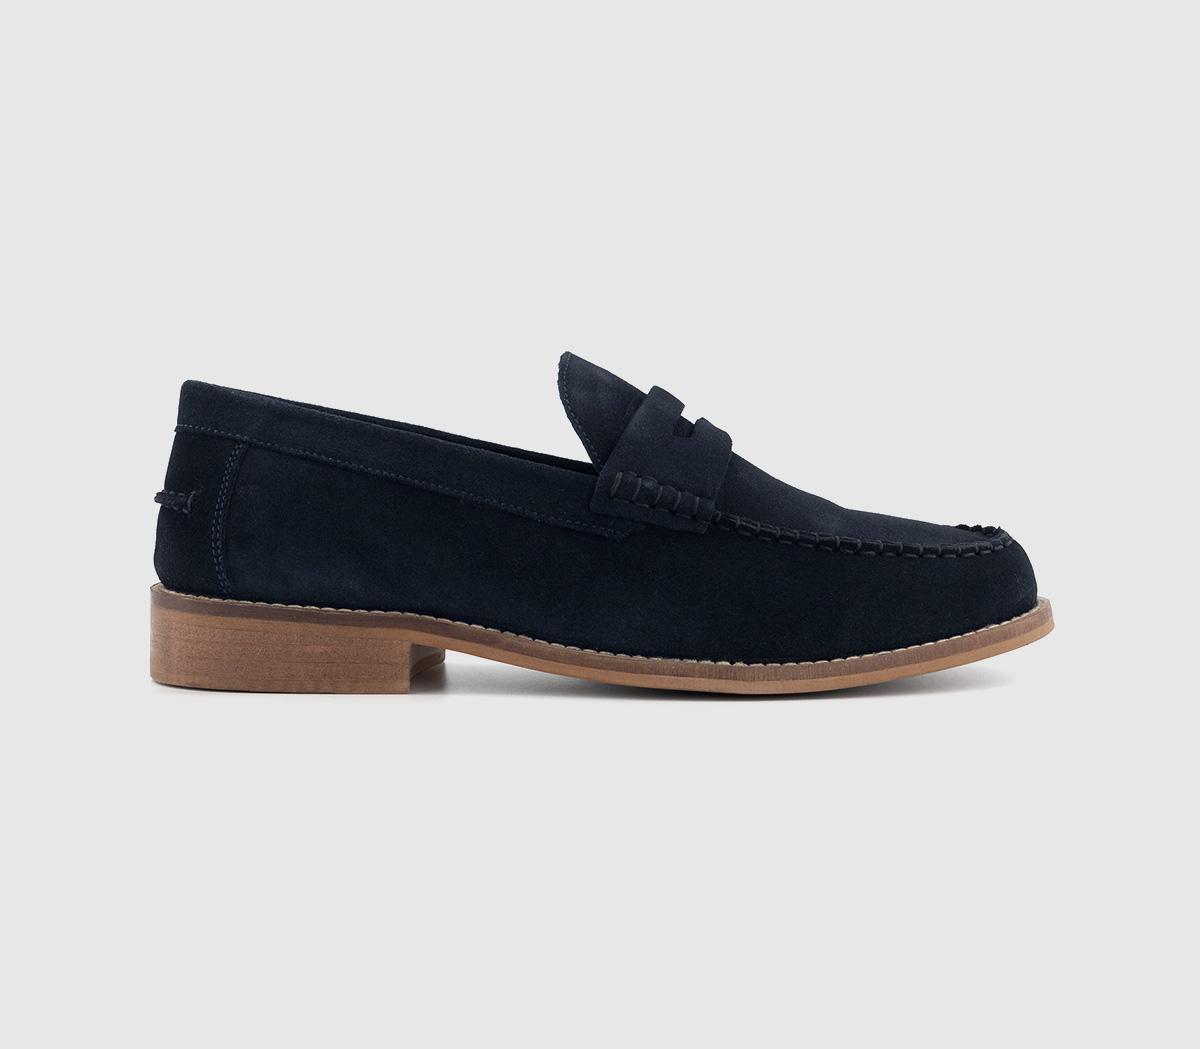 OFFICECanyon Apron Stitch LoafersNavy Suede